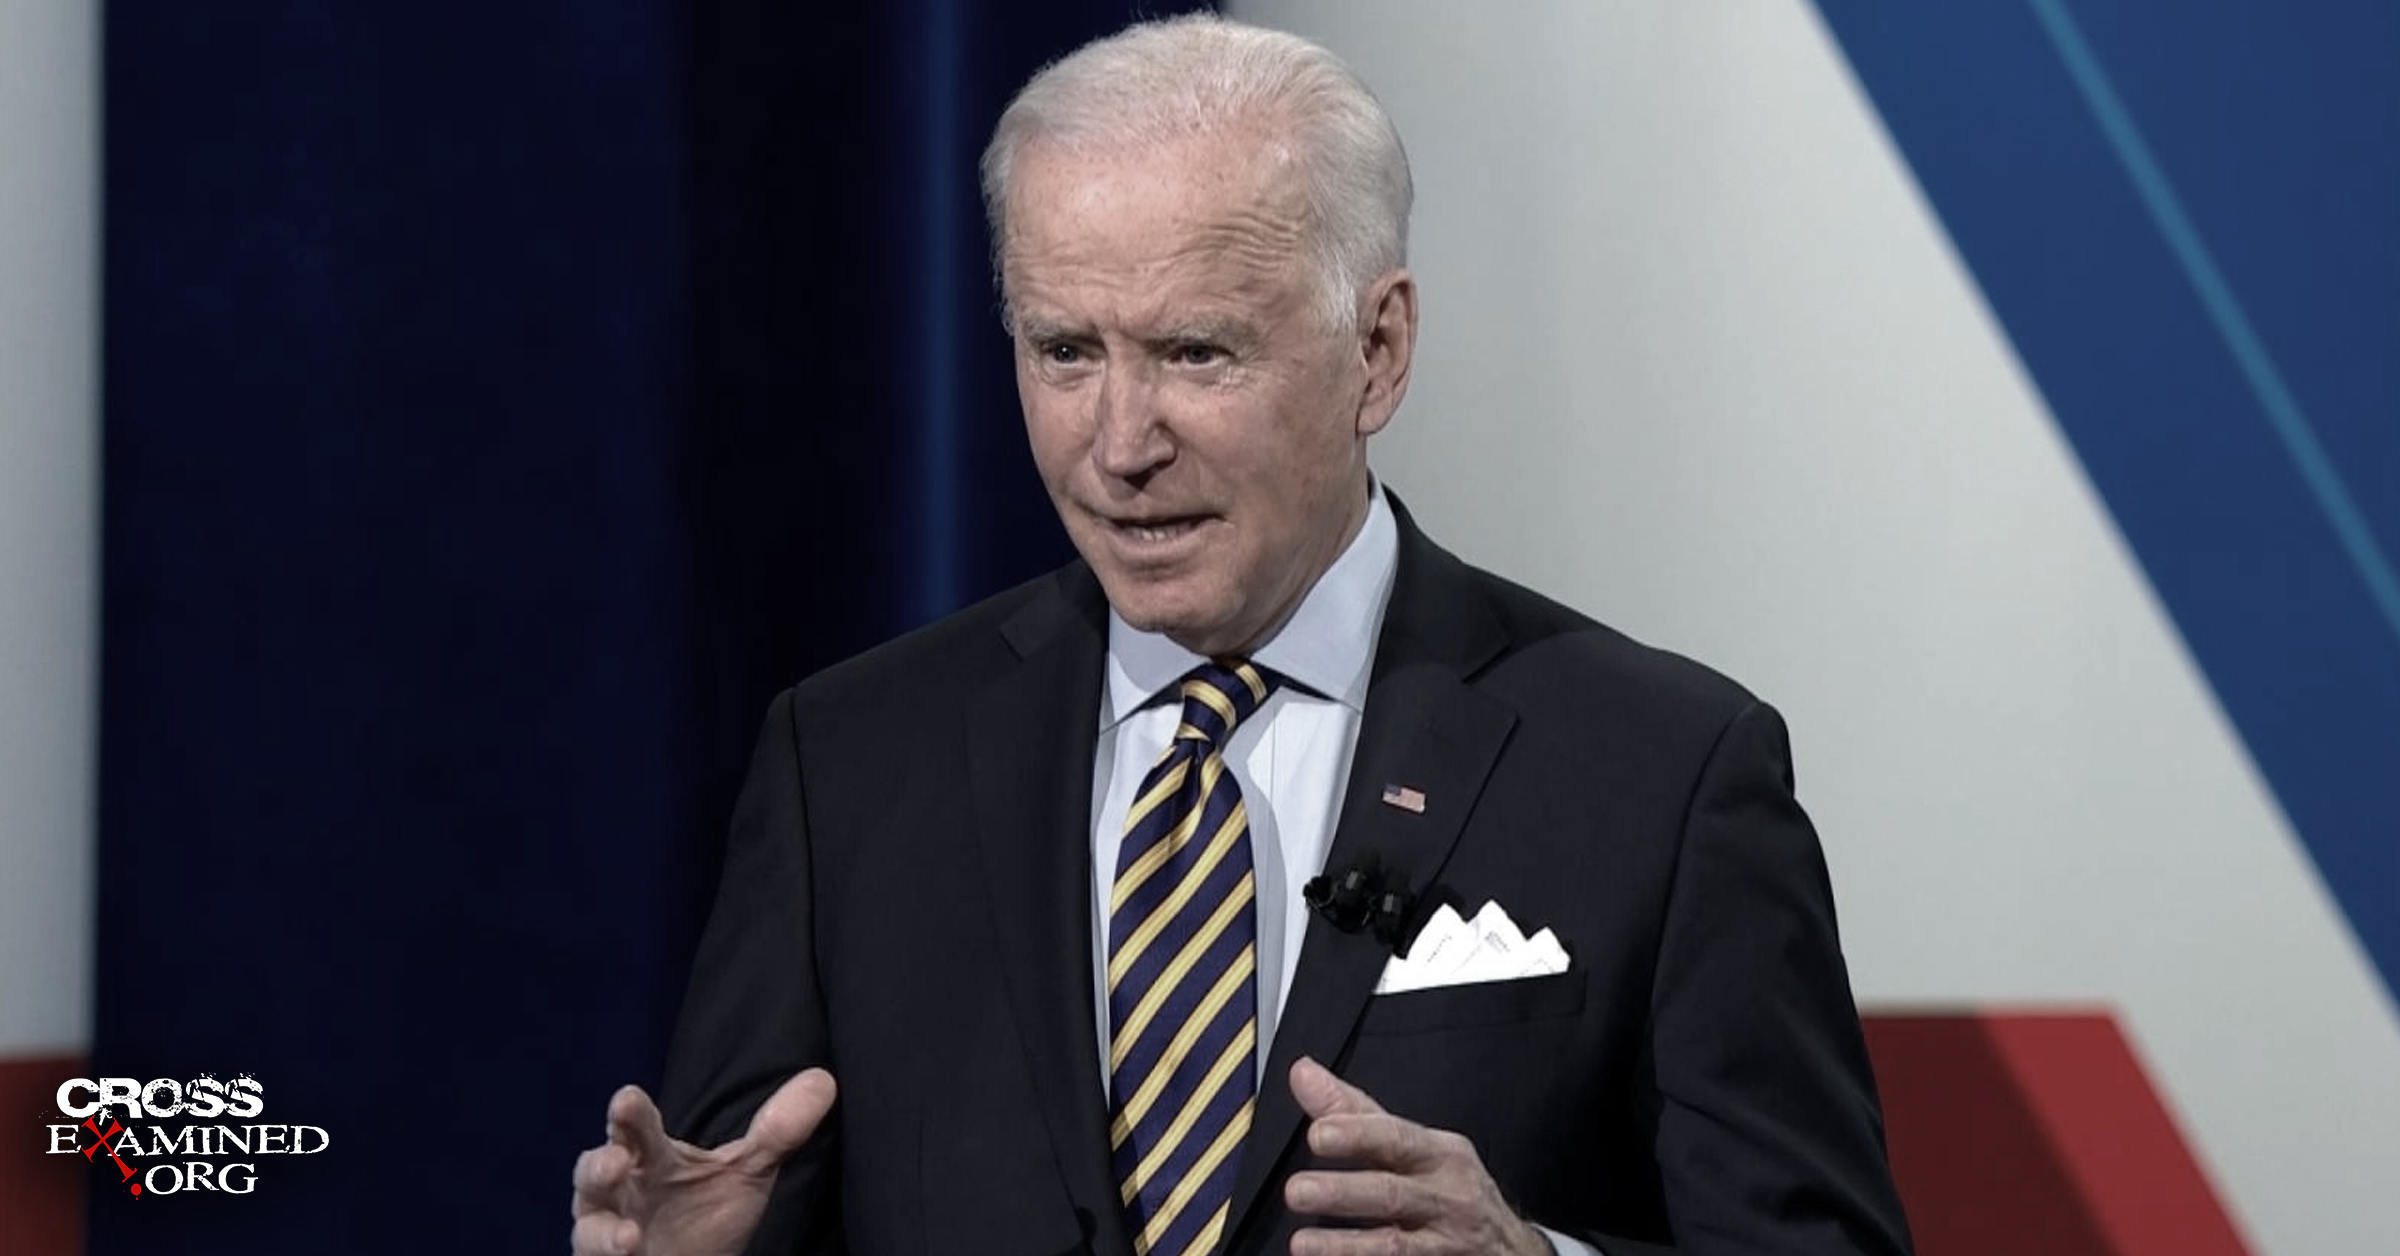 Pope Biden and the New Theocracy of the Christian Left